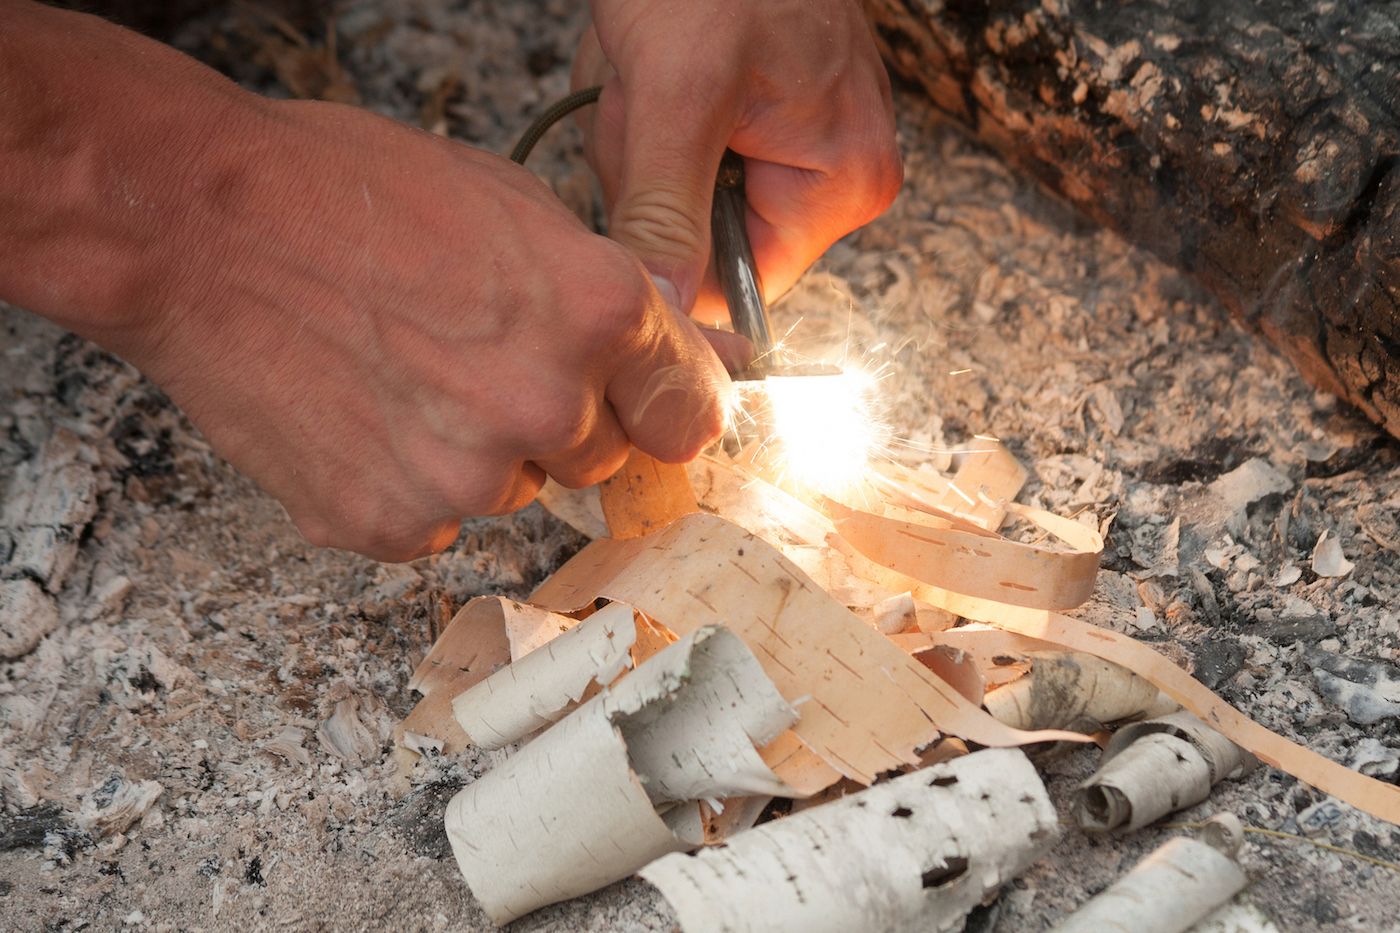 Birch bark catches the sparks produces by a fire steel.